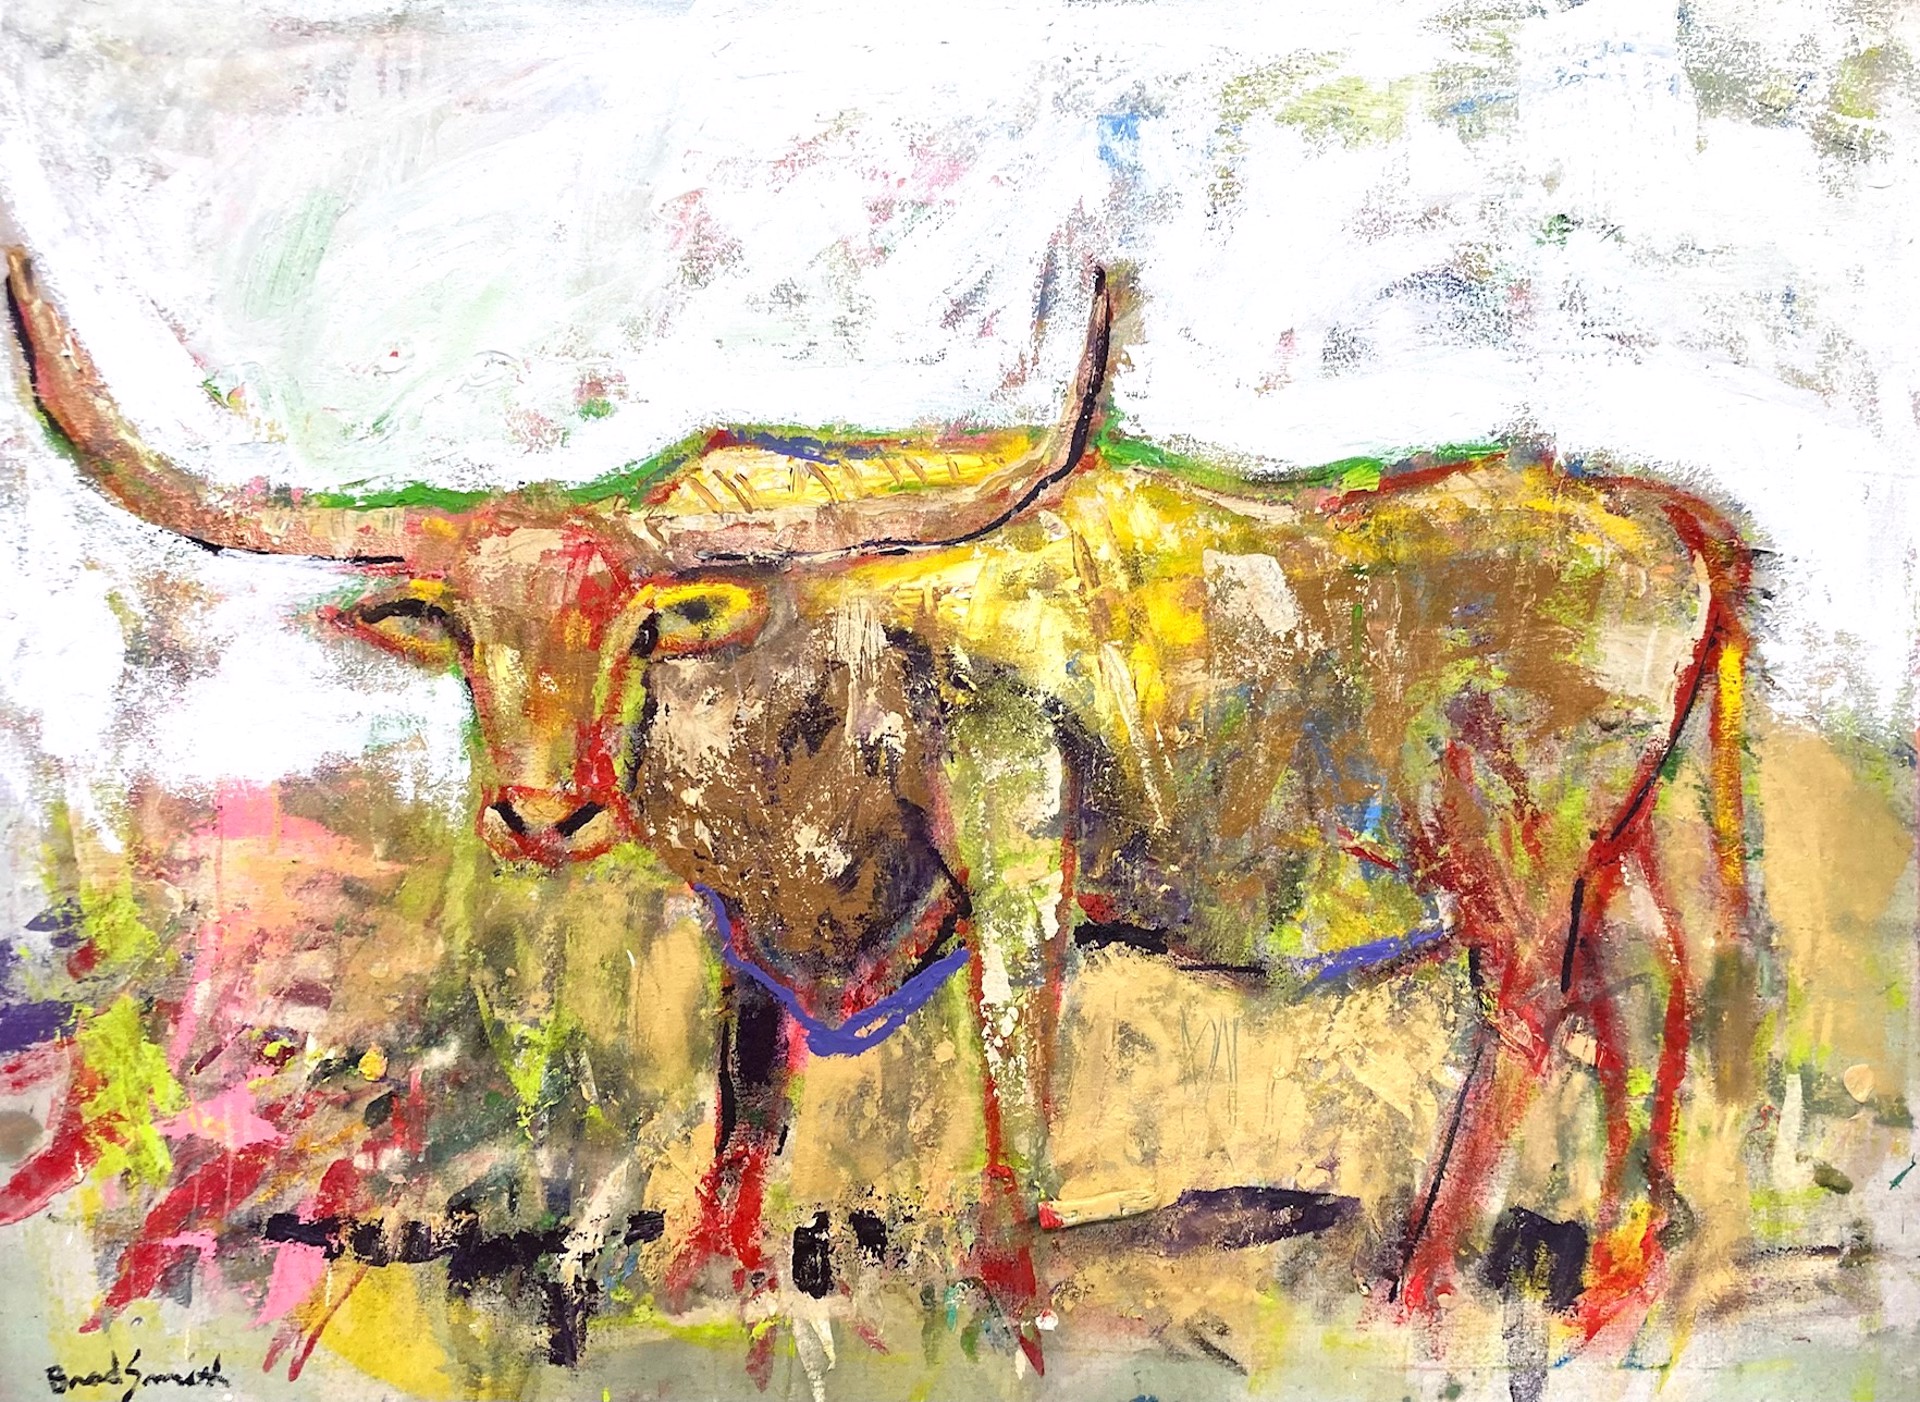 Longhorn on a Hot Day sold by Brad Smith